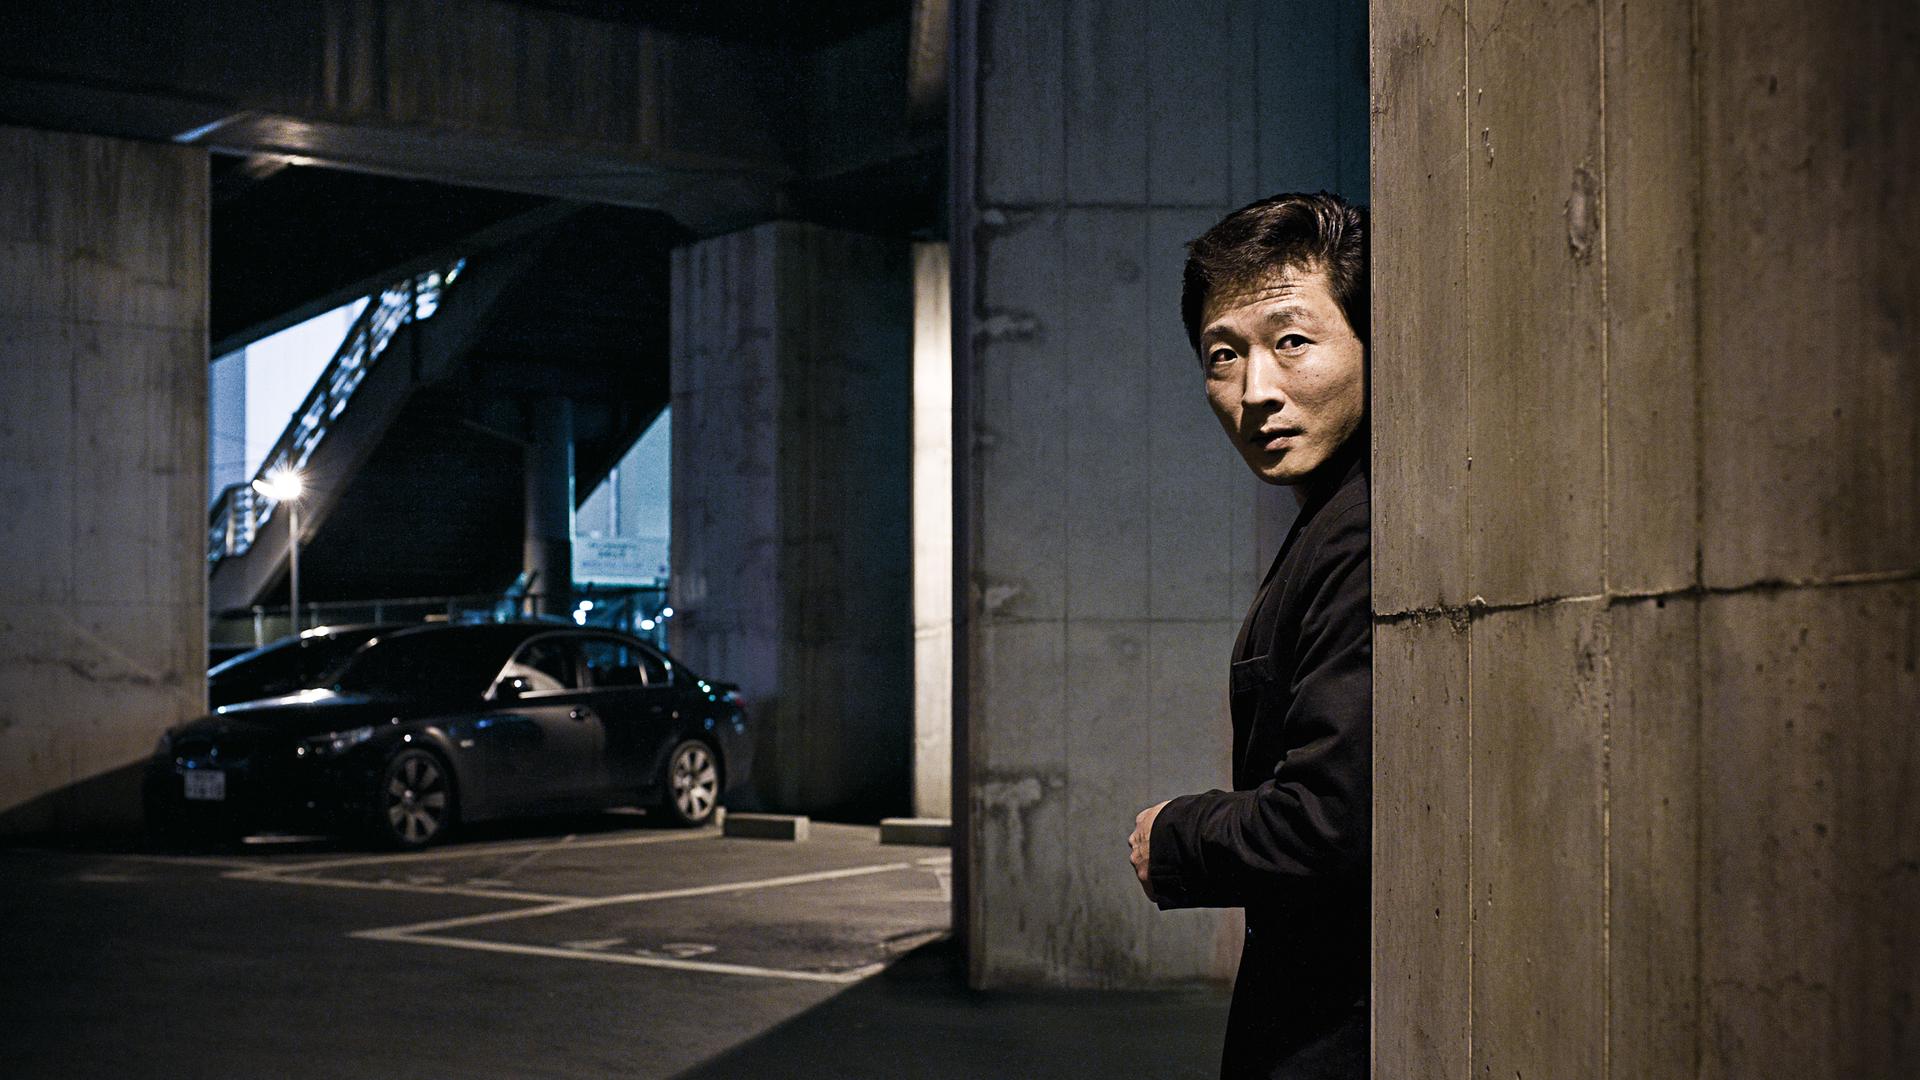 For nine years, Shou Hatori ran a nighttime moving company that helped people disappear in Japan.